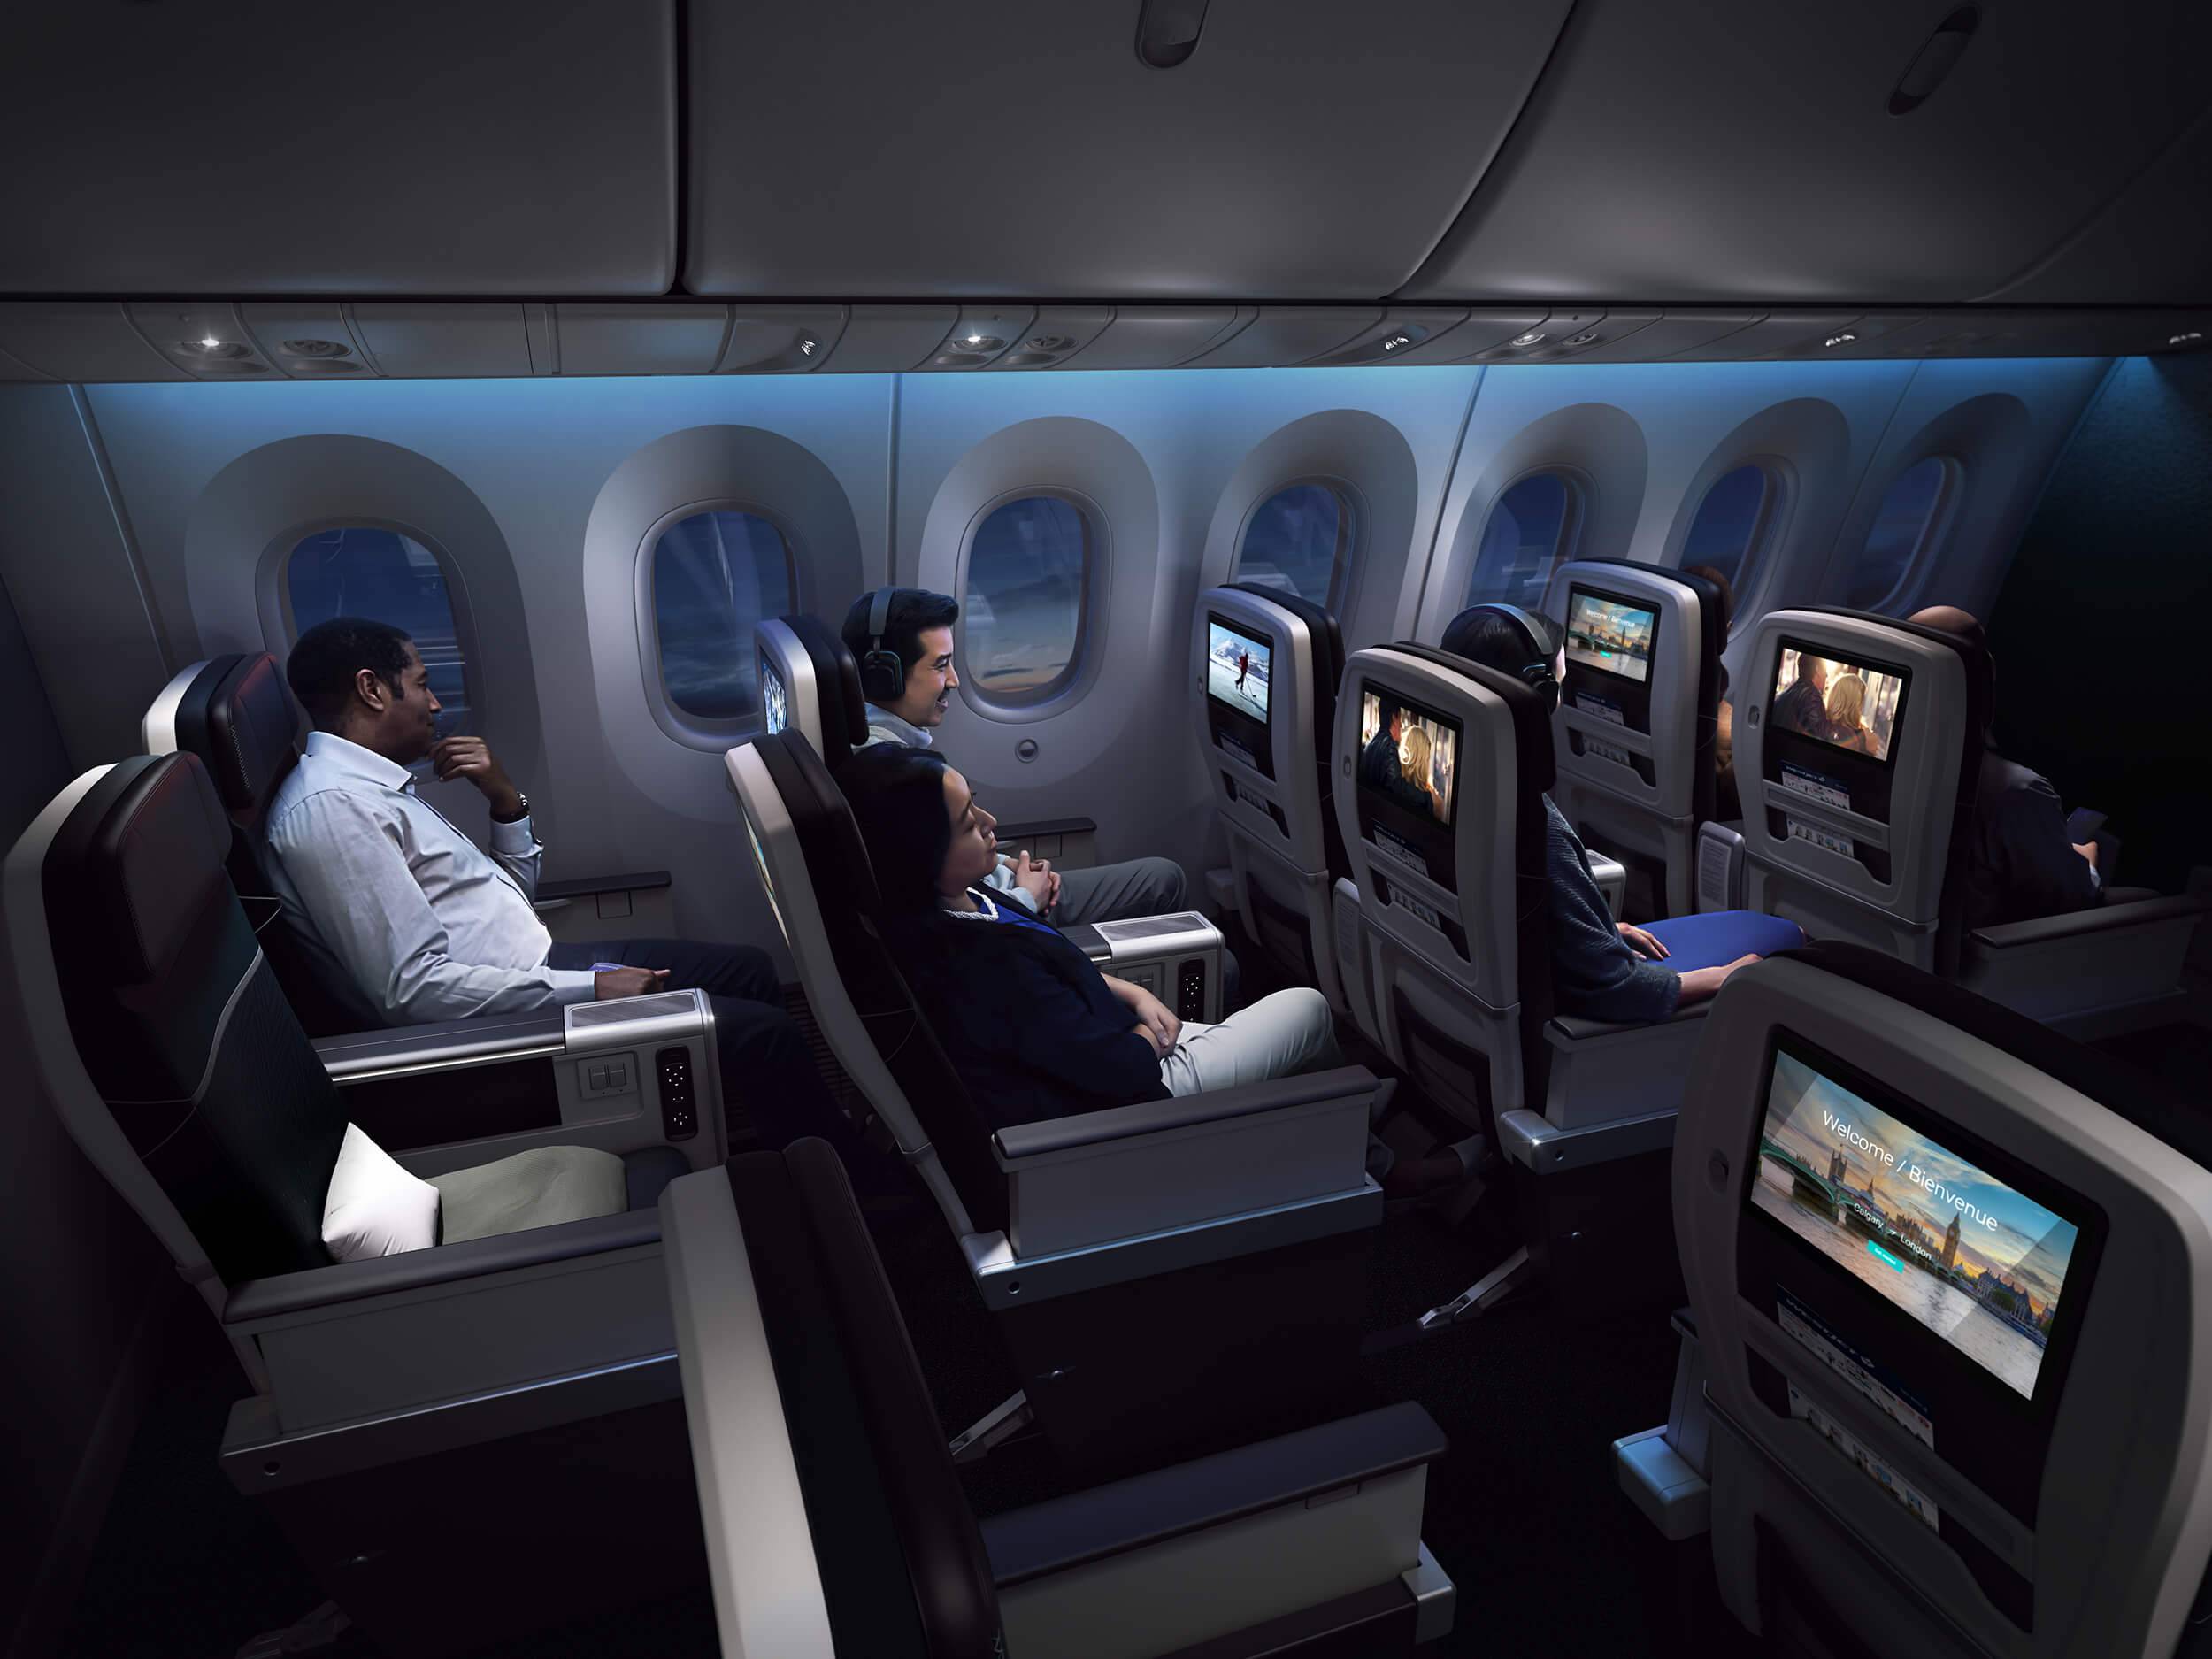 Passengers in Business Class onboard the WestJet B787 are watching TV in their seats as the night falls